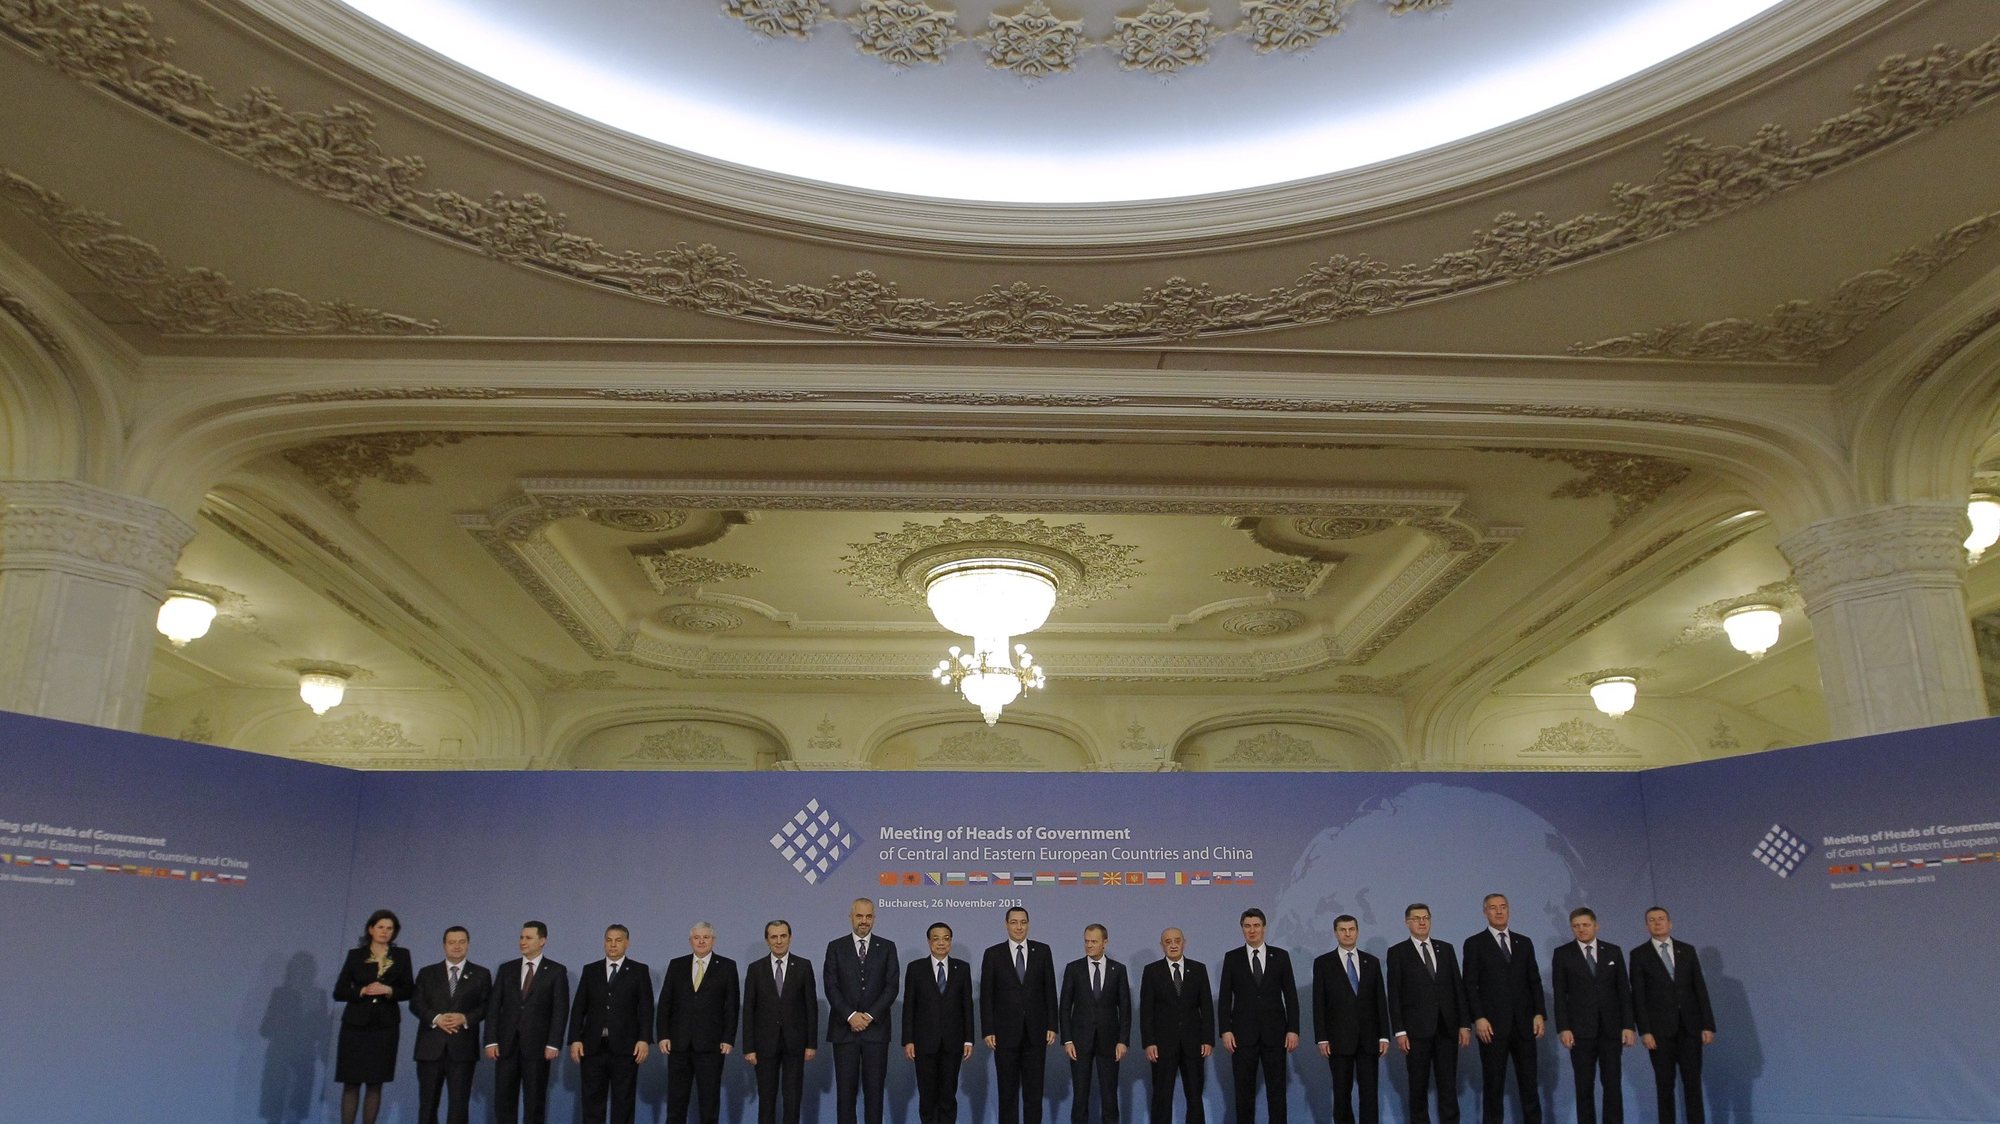 epa03965995 Family photo taken during the China -CEE (Central and East European Countries) Summit, at the Parliament Palace, in Bucharest, Romania, 26 November 2013. The Meeting of the Heads of Government in Central and Eastern Europe - China was attended by prime ministers of Albania, Bosnia-Herzegovina, Bulgaria, Czech Republic, Croatia, Estonia, Lithuania, Macedonia, Montenegro, Poland, Serbia, Slovakia, Slovenia, Hungary and  Latvia, in order to boost trade and investment relations between the two areas, in common projects regarding the sectors of energy, agriculture, infrastructure, transport, IT, and tourism. From left to right, the participants could be identiefied as prime ministers of: Slovenia -Alenka Bratusek, Serbia - Ivica Dacic, Macedonia - Nikola Gruevski, Hungary - Viktor Orban, Czech Republic - Jiri Rusnok, Bulgaria -  Plamen Oresharski, Albania - Edi rama, China - Li-Keqiang, Romania- Victor Ponta, Poland - Donald Tusk, Bosnia Herzegovina - Vjeroslav Bevanda, Croatia - Zoran Milanovic, Estonia - Andrus Ansip, Lithuania - Algirdas Butkevicius, Montenegro - Milo Djukanovic, Slovakia - Robert Fico, and Latvia Foreign Minister Edgars Rinkevics.  EPA/ROBERT GHEMENT